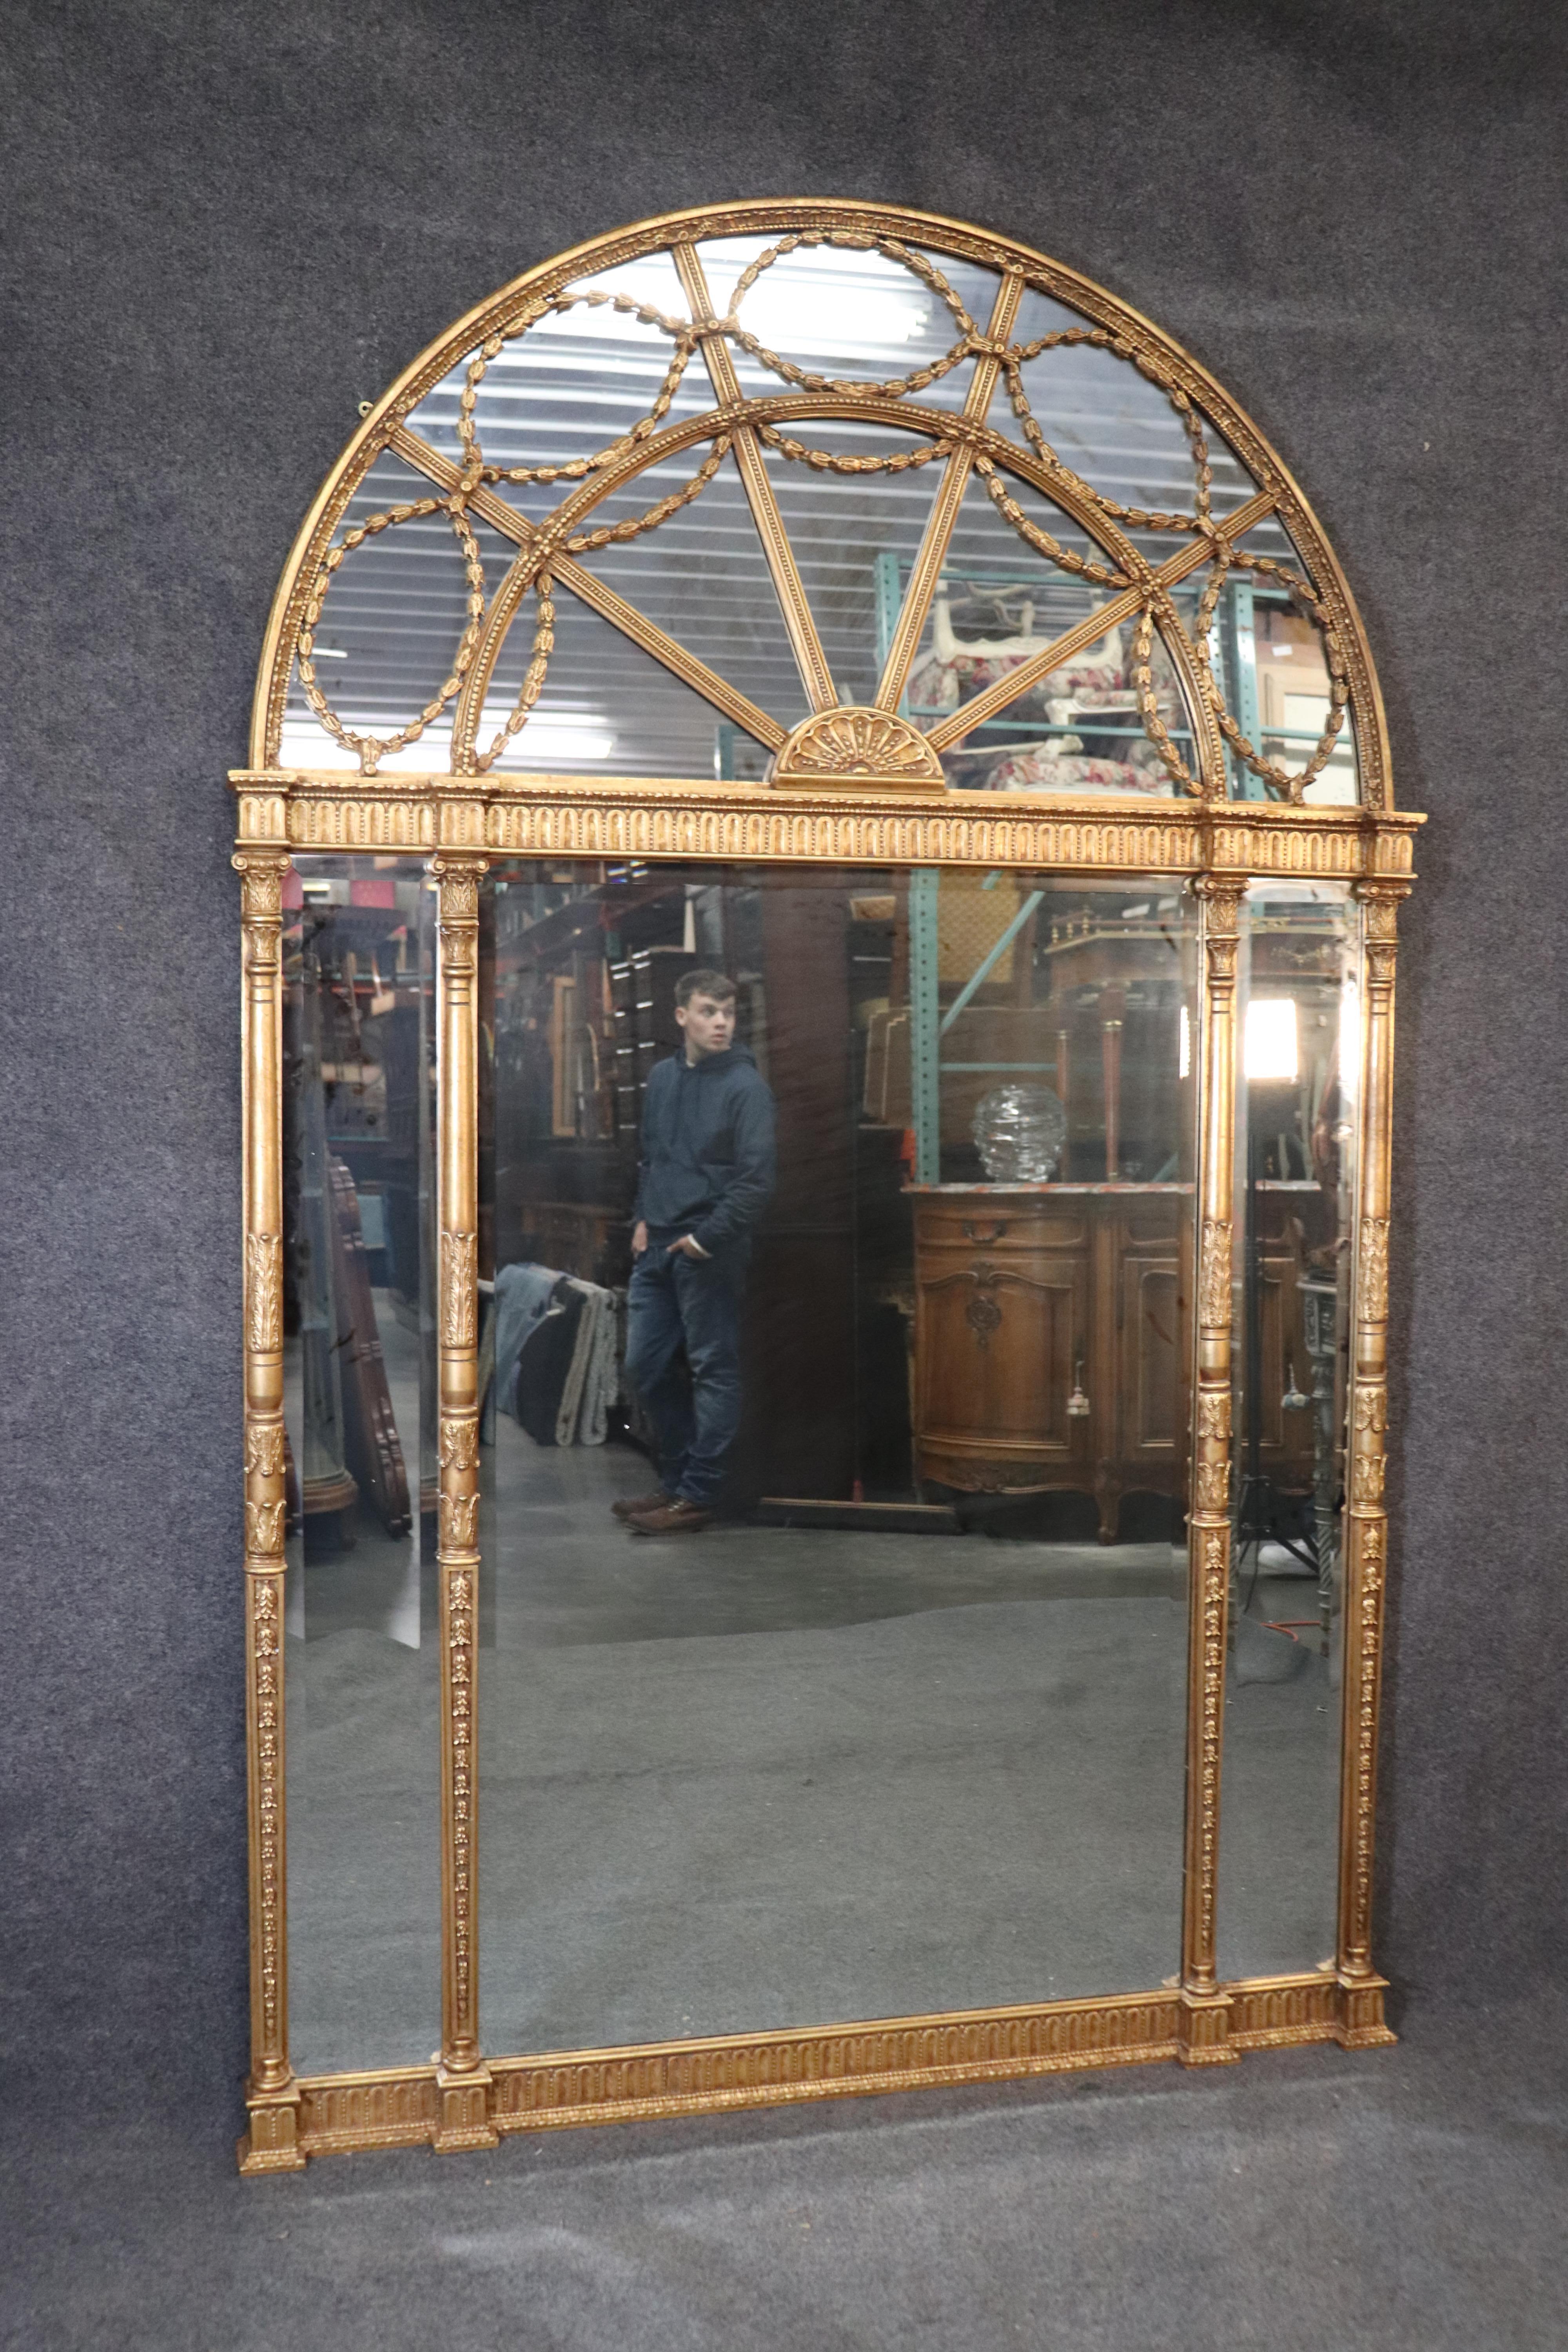 This is a massive and extremely beautiful mirror that has all of the finest carved details and lustrous gold leaf along with a fantastic design. The mirror is 91 tall x 58 wide x 3 inches thick.